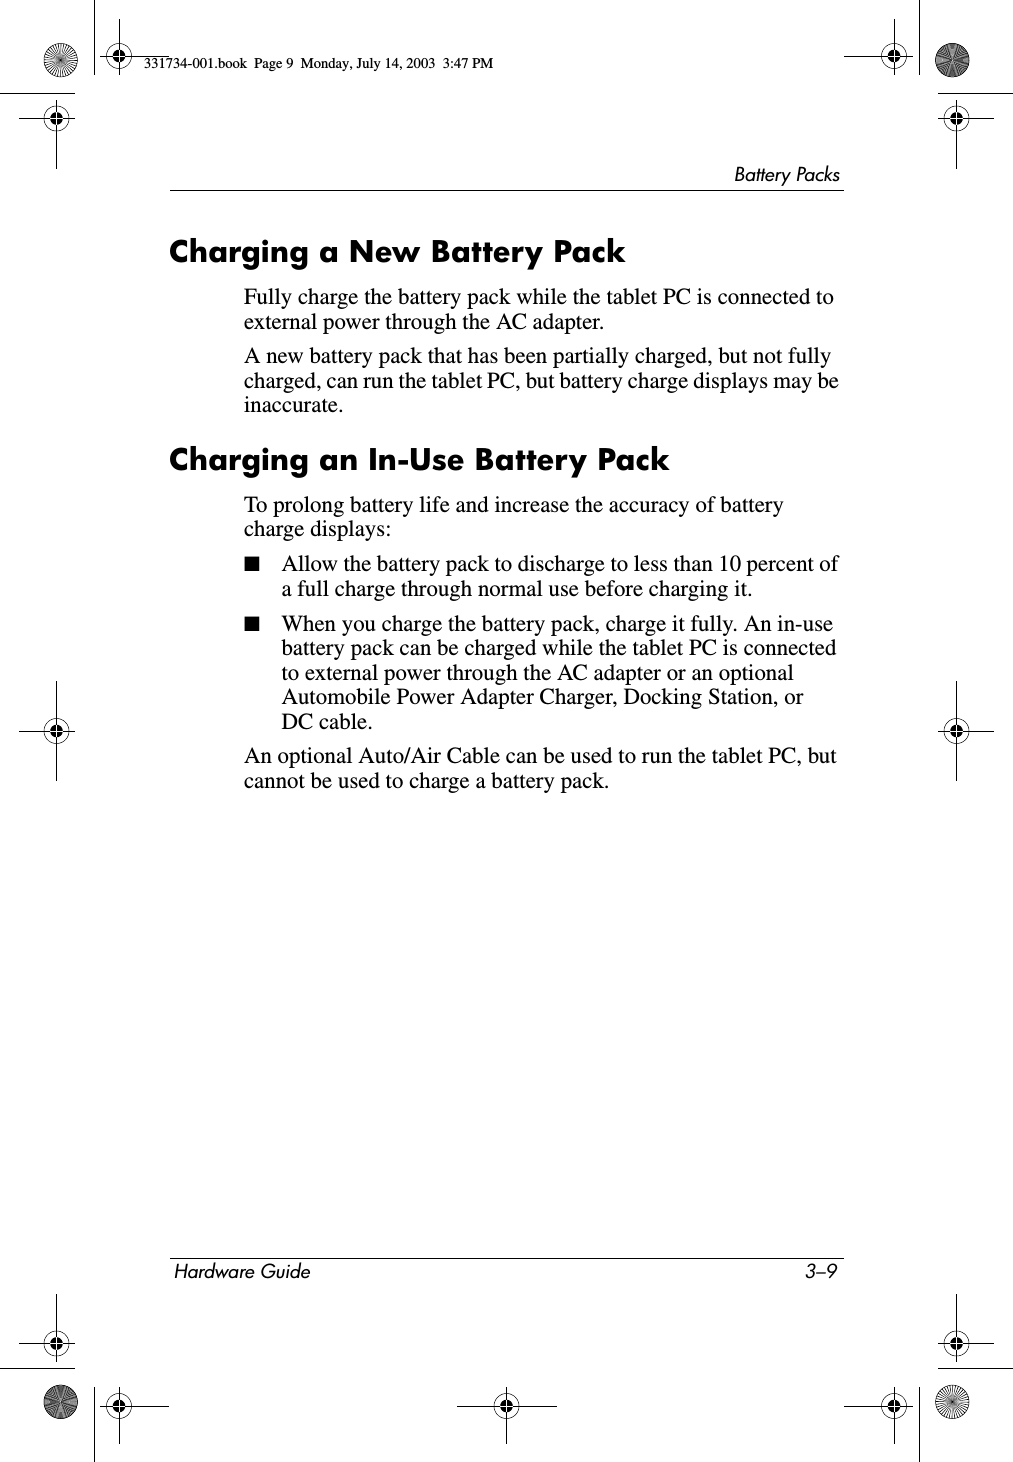 Battery PacksHardware Guide 3–9Charging a New Battery PackFully charge the battery pack while the tablet PC is connected to external power through the AC adapter.A new battery pack that has been partially charged, but not fully charged, can run the tablet PC, but battery charge displays may be inaccurate.Charging an In-Use Battery PackTo prolong battery life and increase the accuracy of battery charge displays:■Allow the battery pack to discharge to less than 10 percent of a full charge through normal use before charging it.■When you charge the battery pack, charge it fully. An in-use battery pack can be charged while the tablet PC is connected to external power through the AC adapter or an optional Automobile Power Adapter Charger, Docking Station, or DC cable.An optional Auto/Air Cable can be used to run the tablet PC, but cannot be used to charge a battery pack.331734-001.book  Page 9  Monday, July 14, 2003  3:47 PM